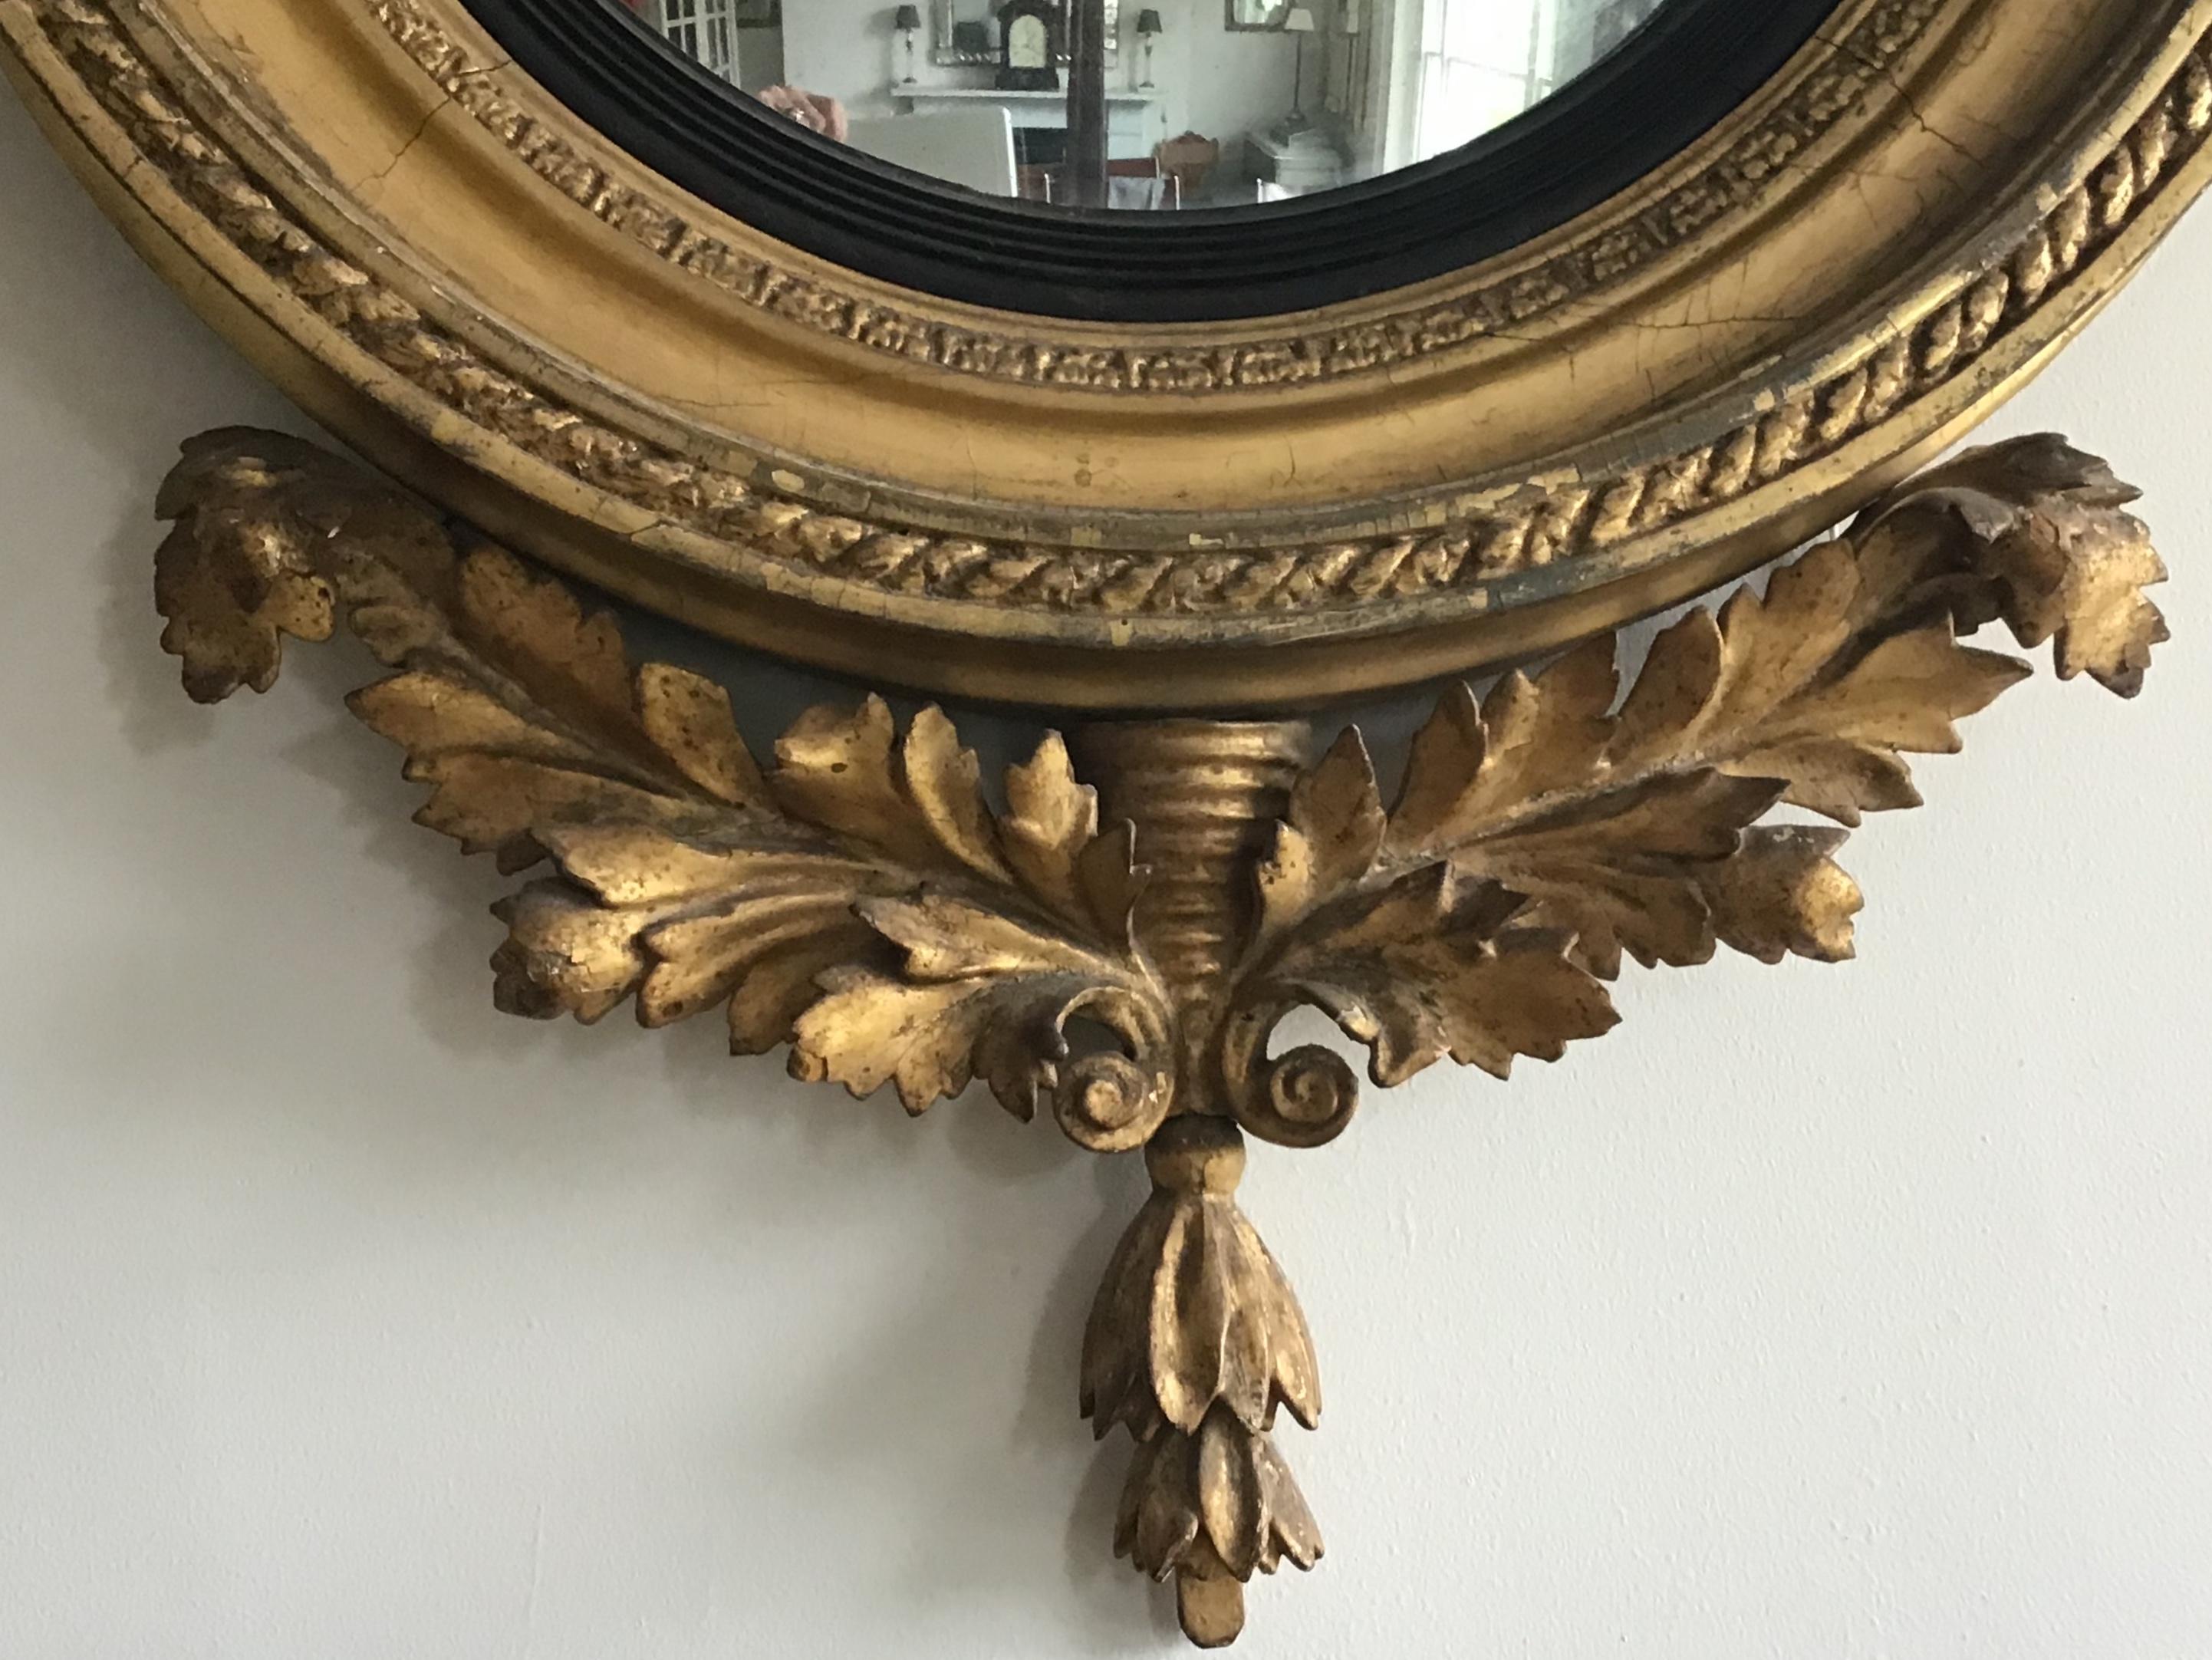 Carved English Regency Period Giltwood Convex Wall Mirror with Eagle Crest For Sale